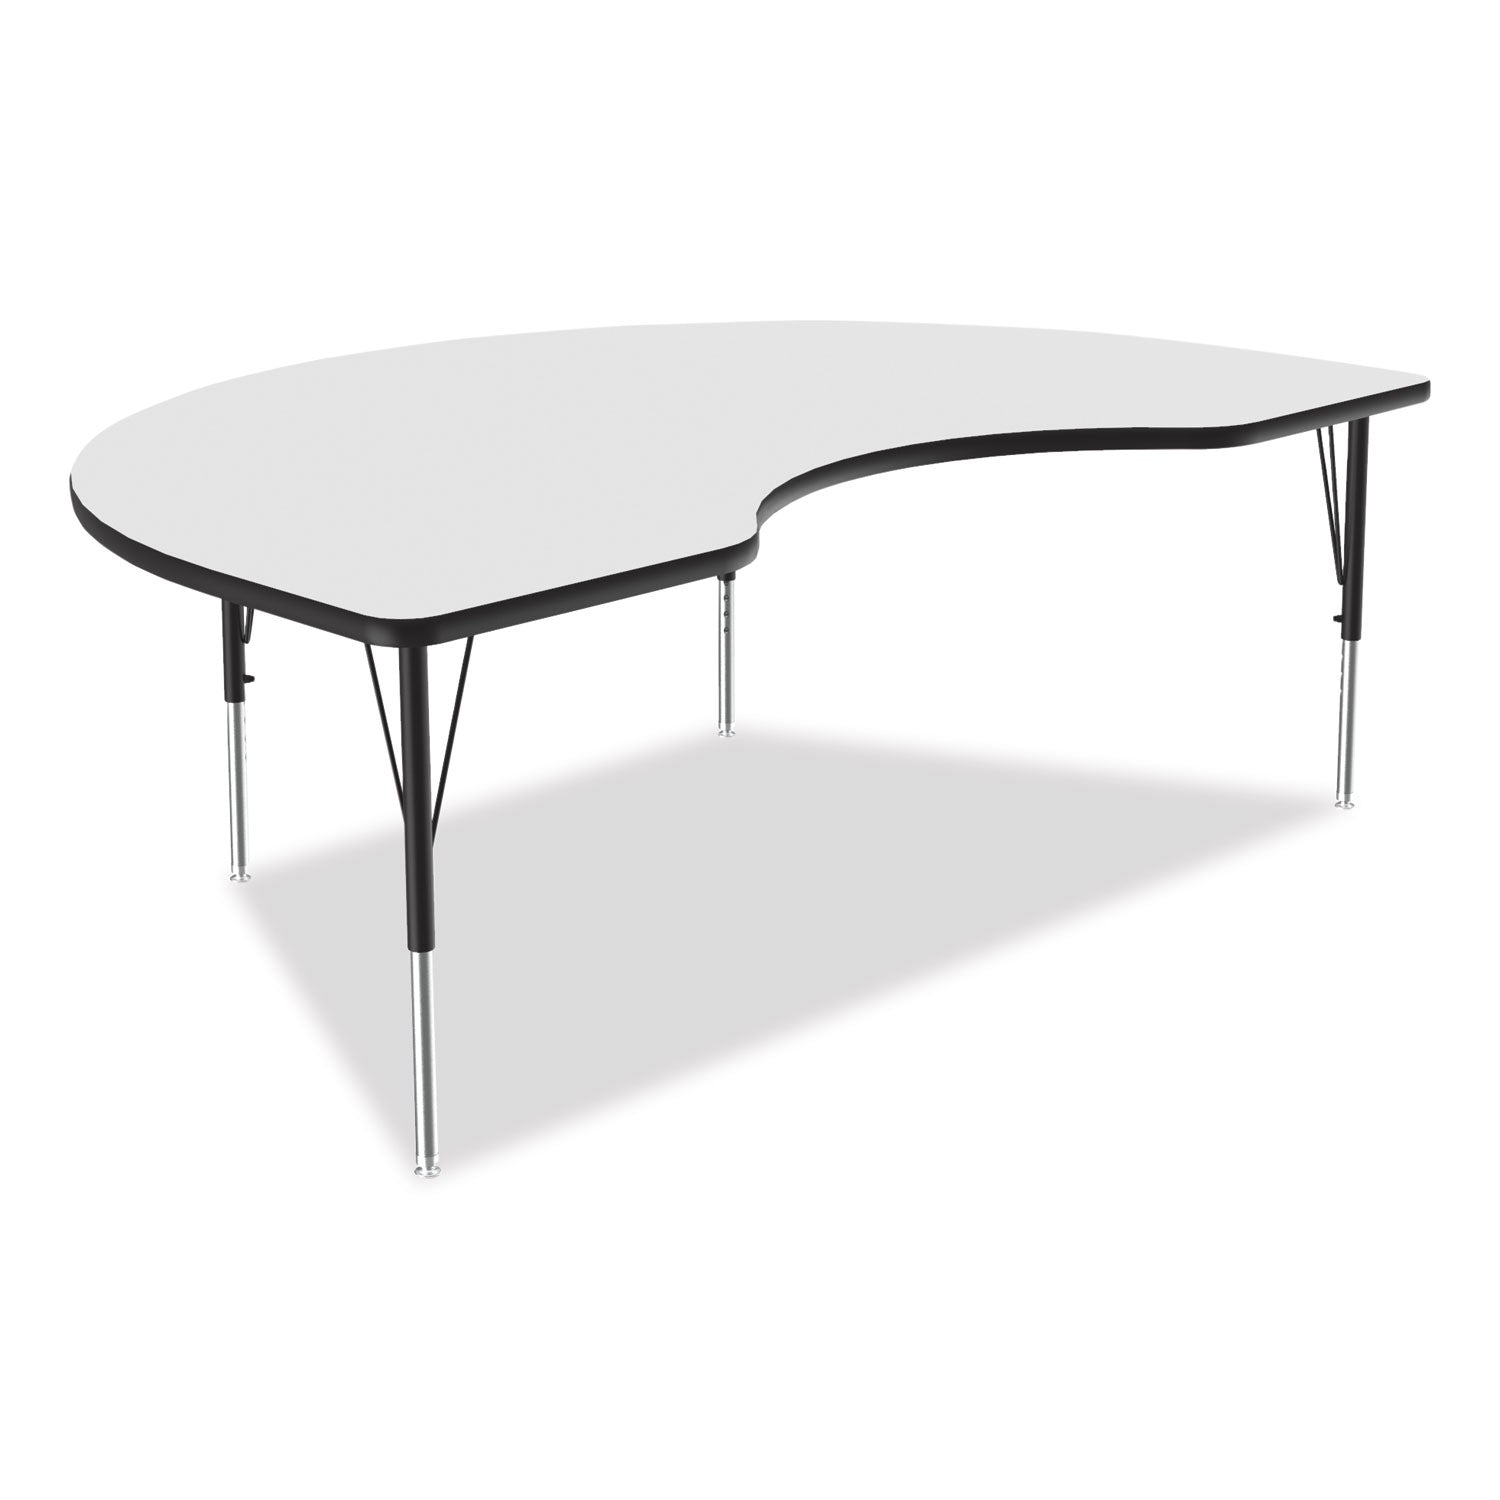 markerboard-activity-table-kidney-shape-72-x-48-x-19-to-29-white-top-black-legs-4-pallet-ships-in-4-6-business-days_crl4872de80954p - 3